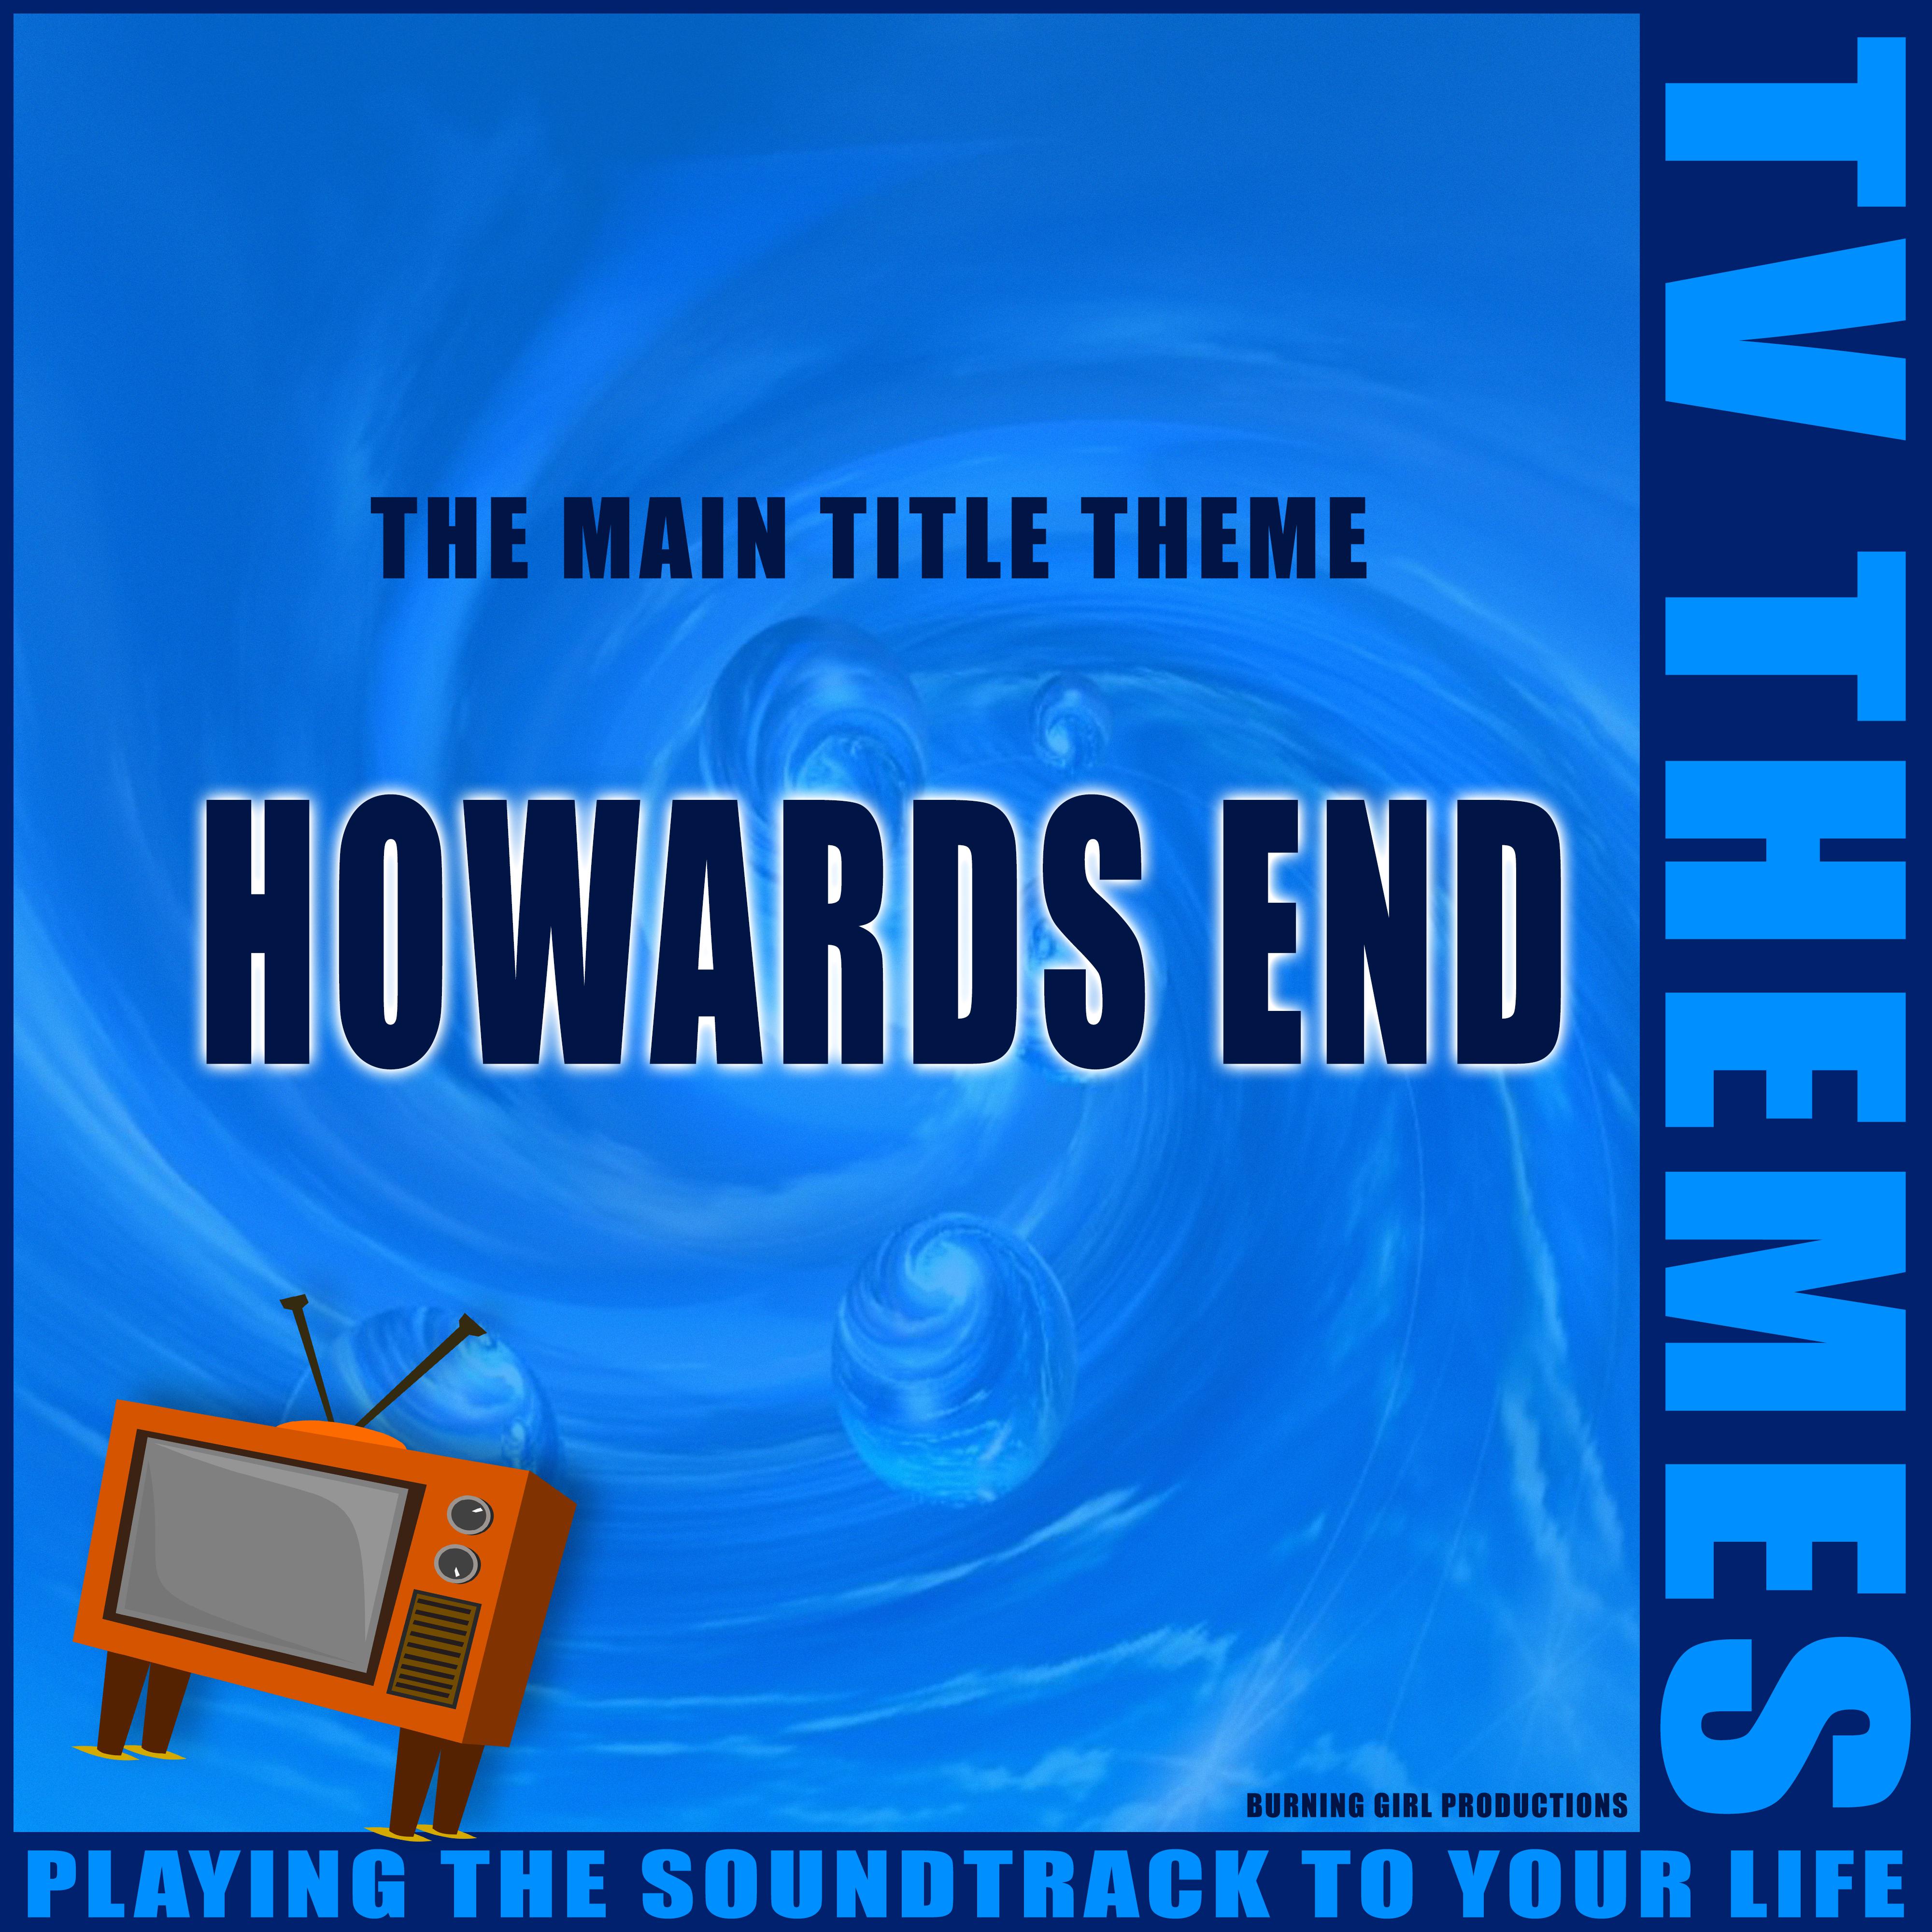 Howards End - The Main Title Theme